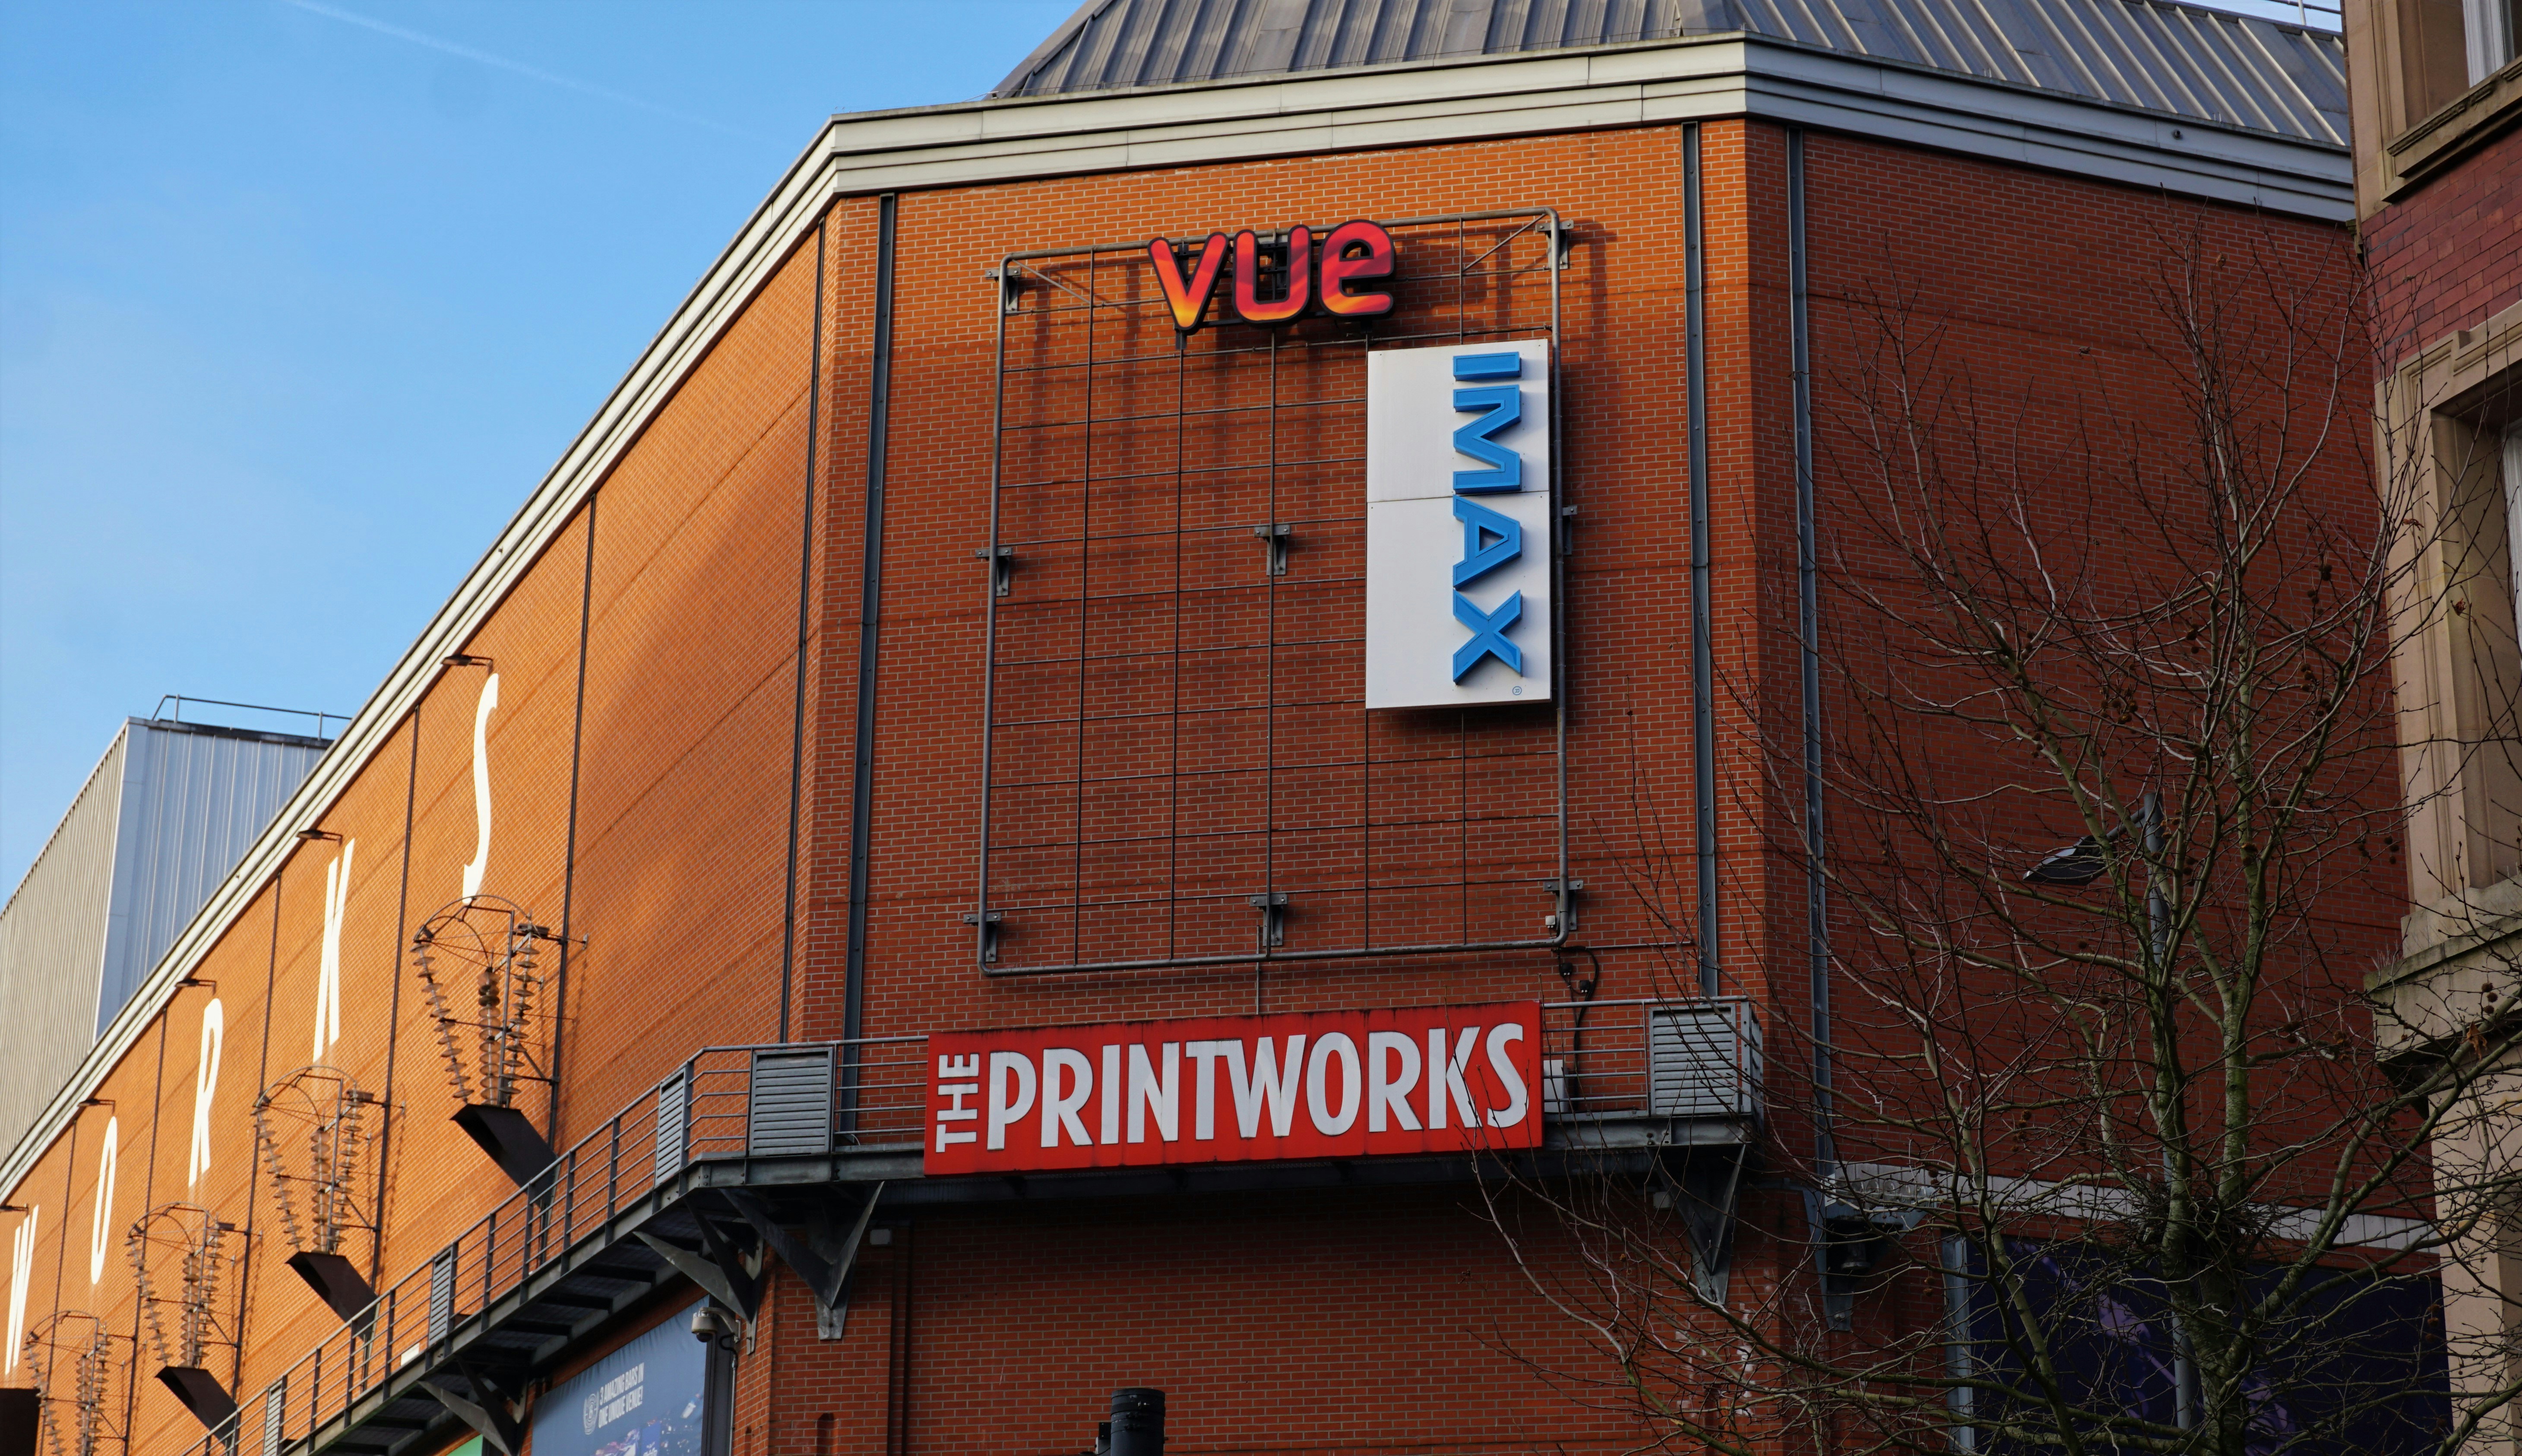 The Printworks sign in Manchester.